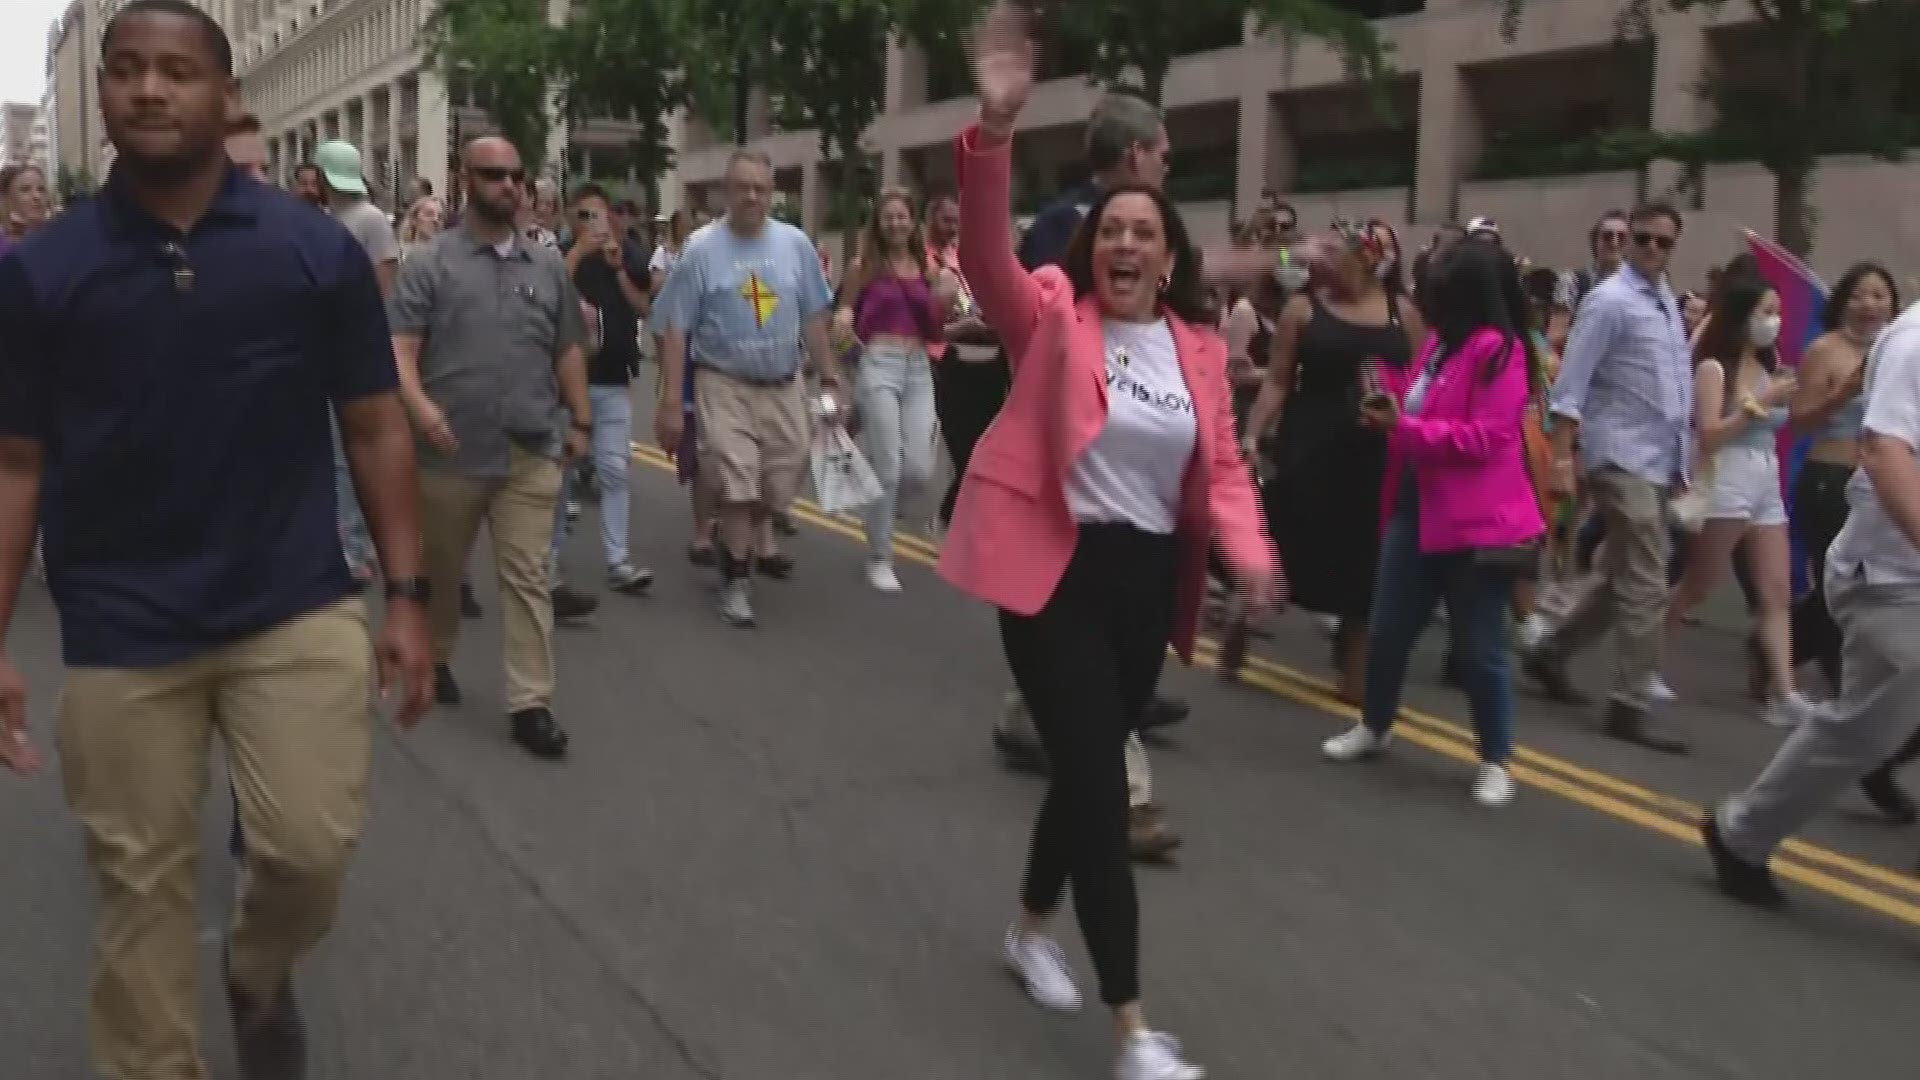 Vice President Kamala Harris walked with attendees of DC's Pride parade that was held in downtown Washington on Saturday.